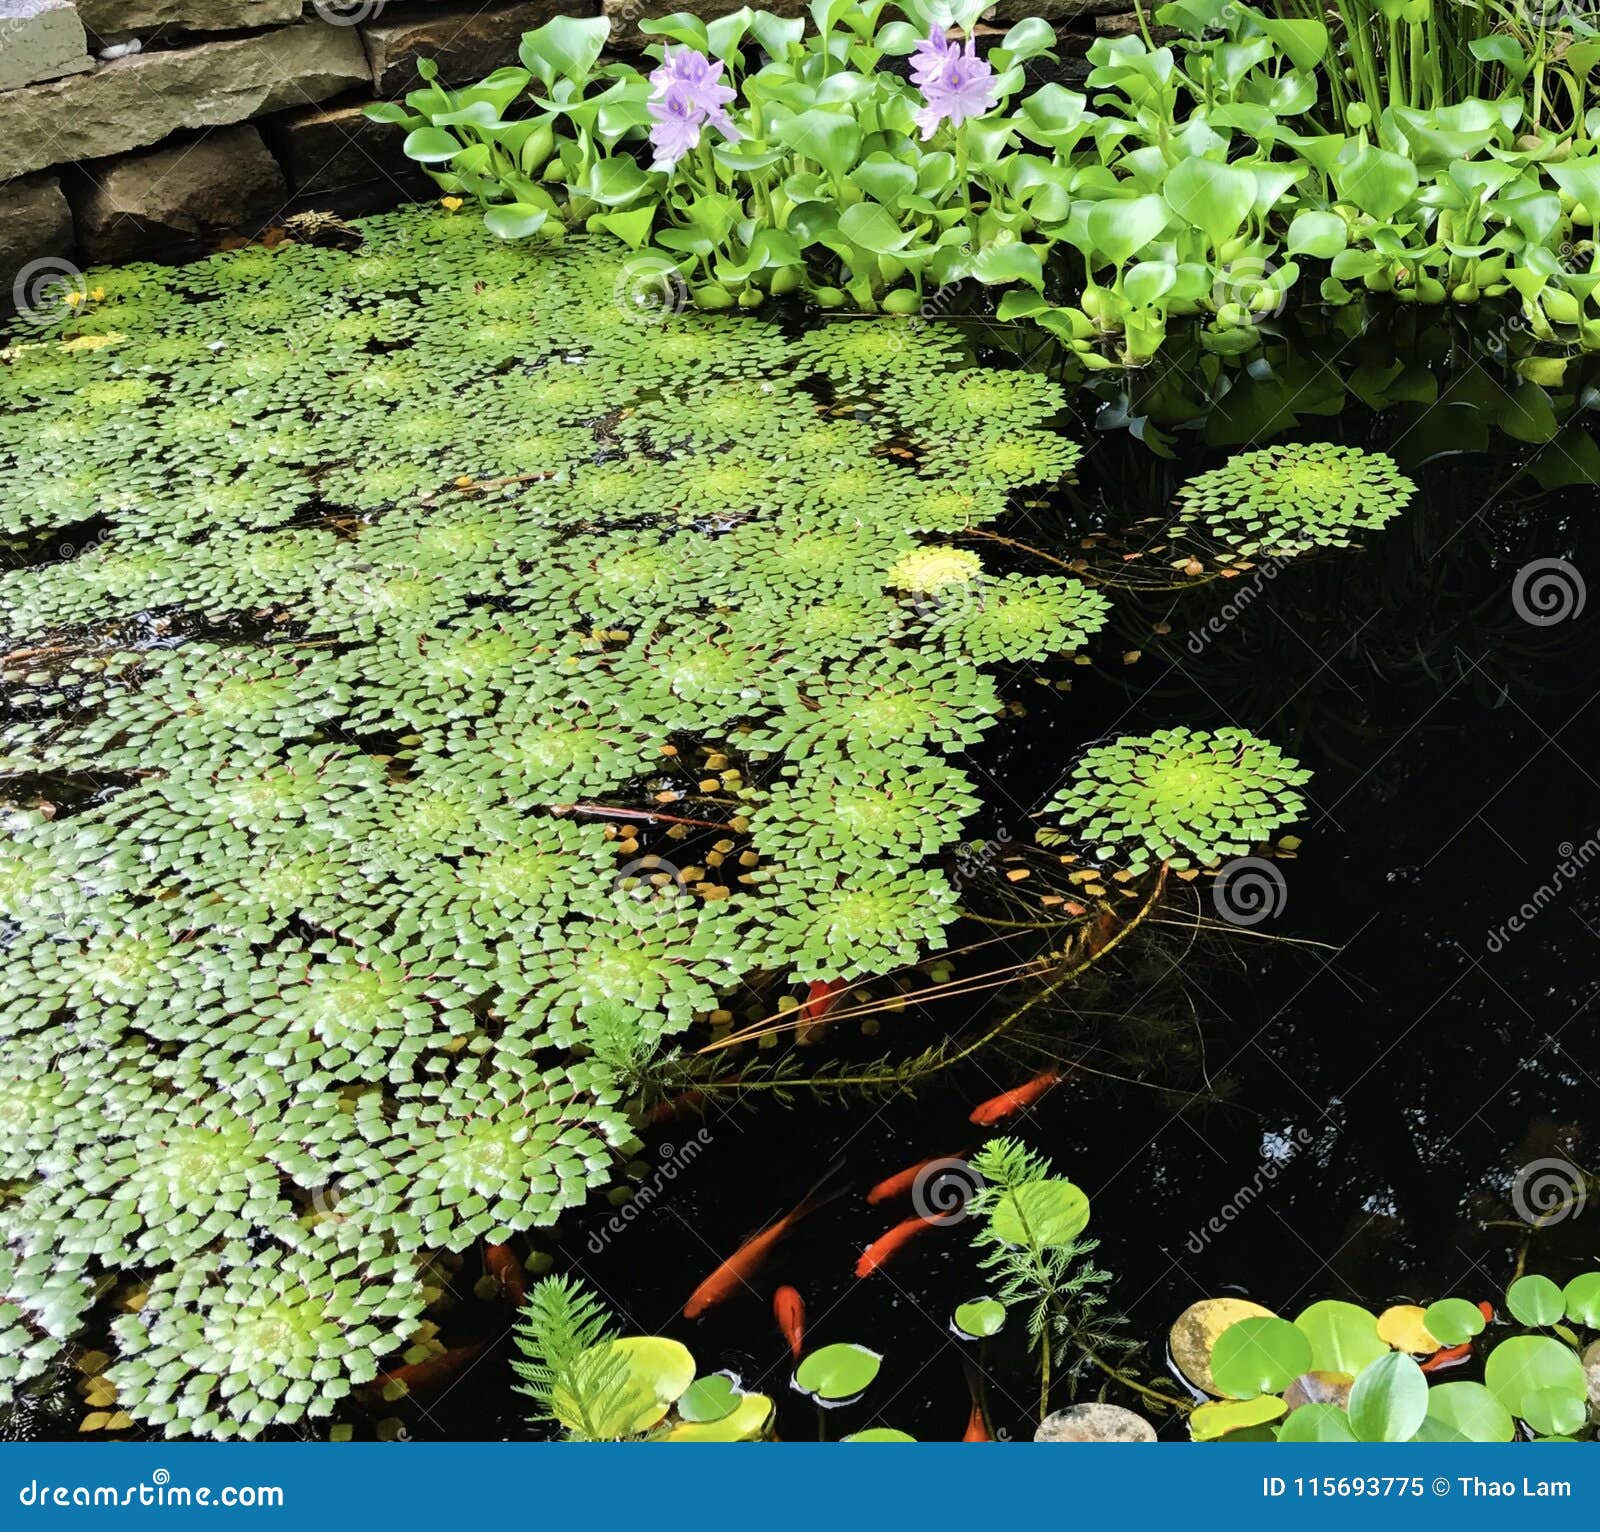 This koi pond modelled after the islands belonging to a national